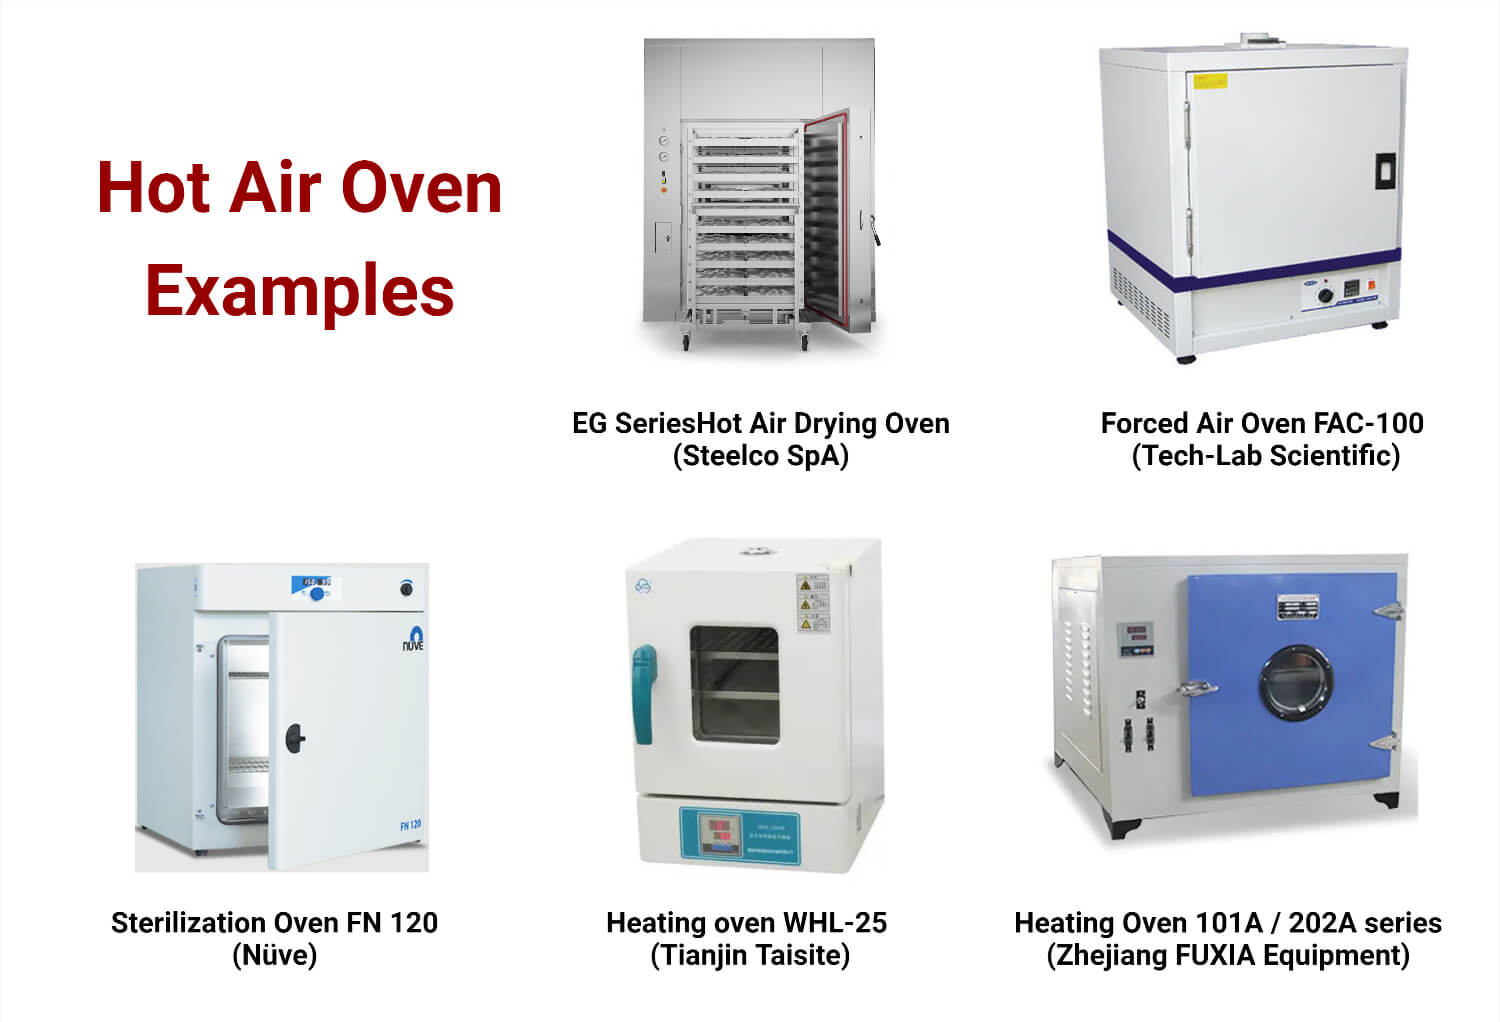 Hot Air Oven Examples